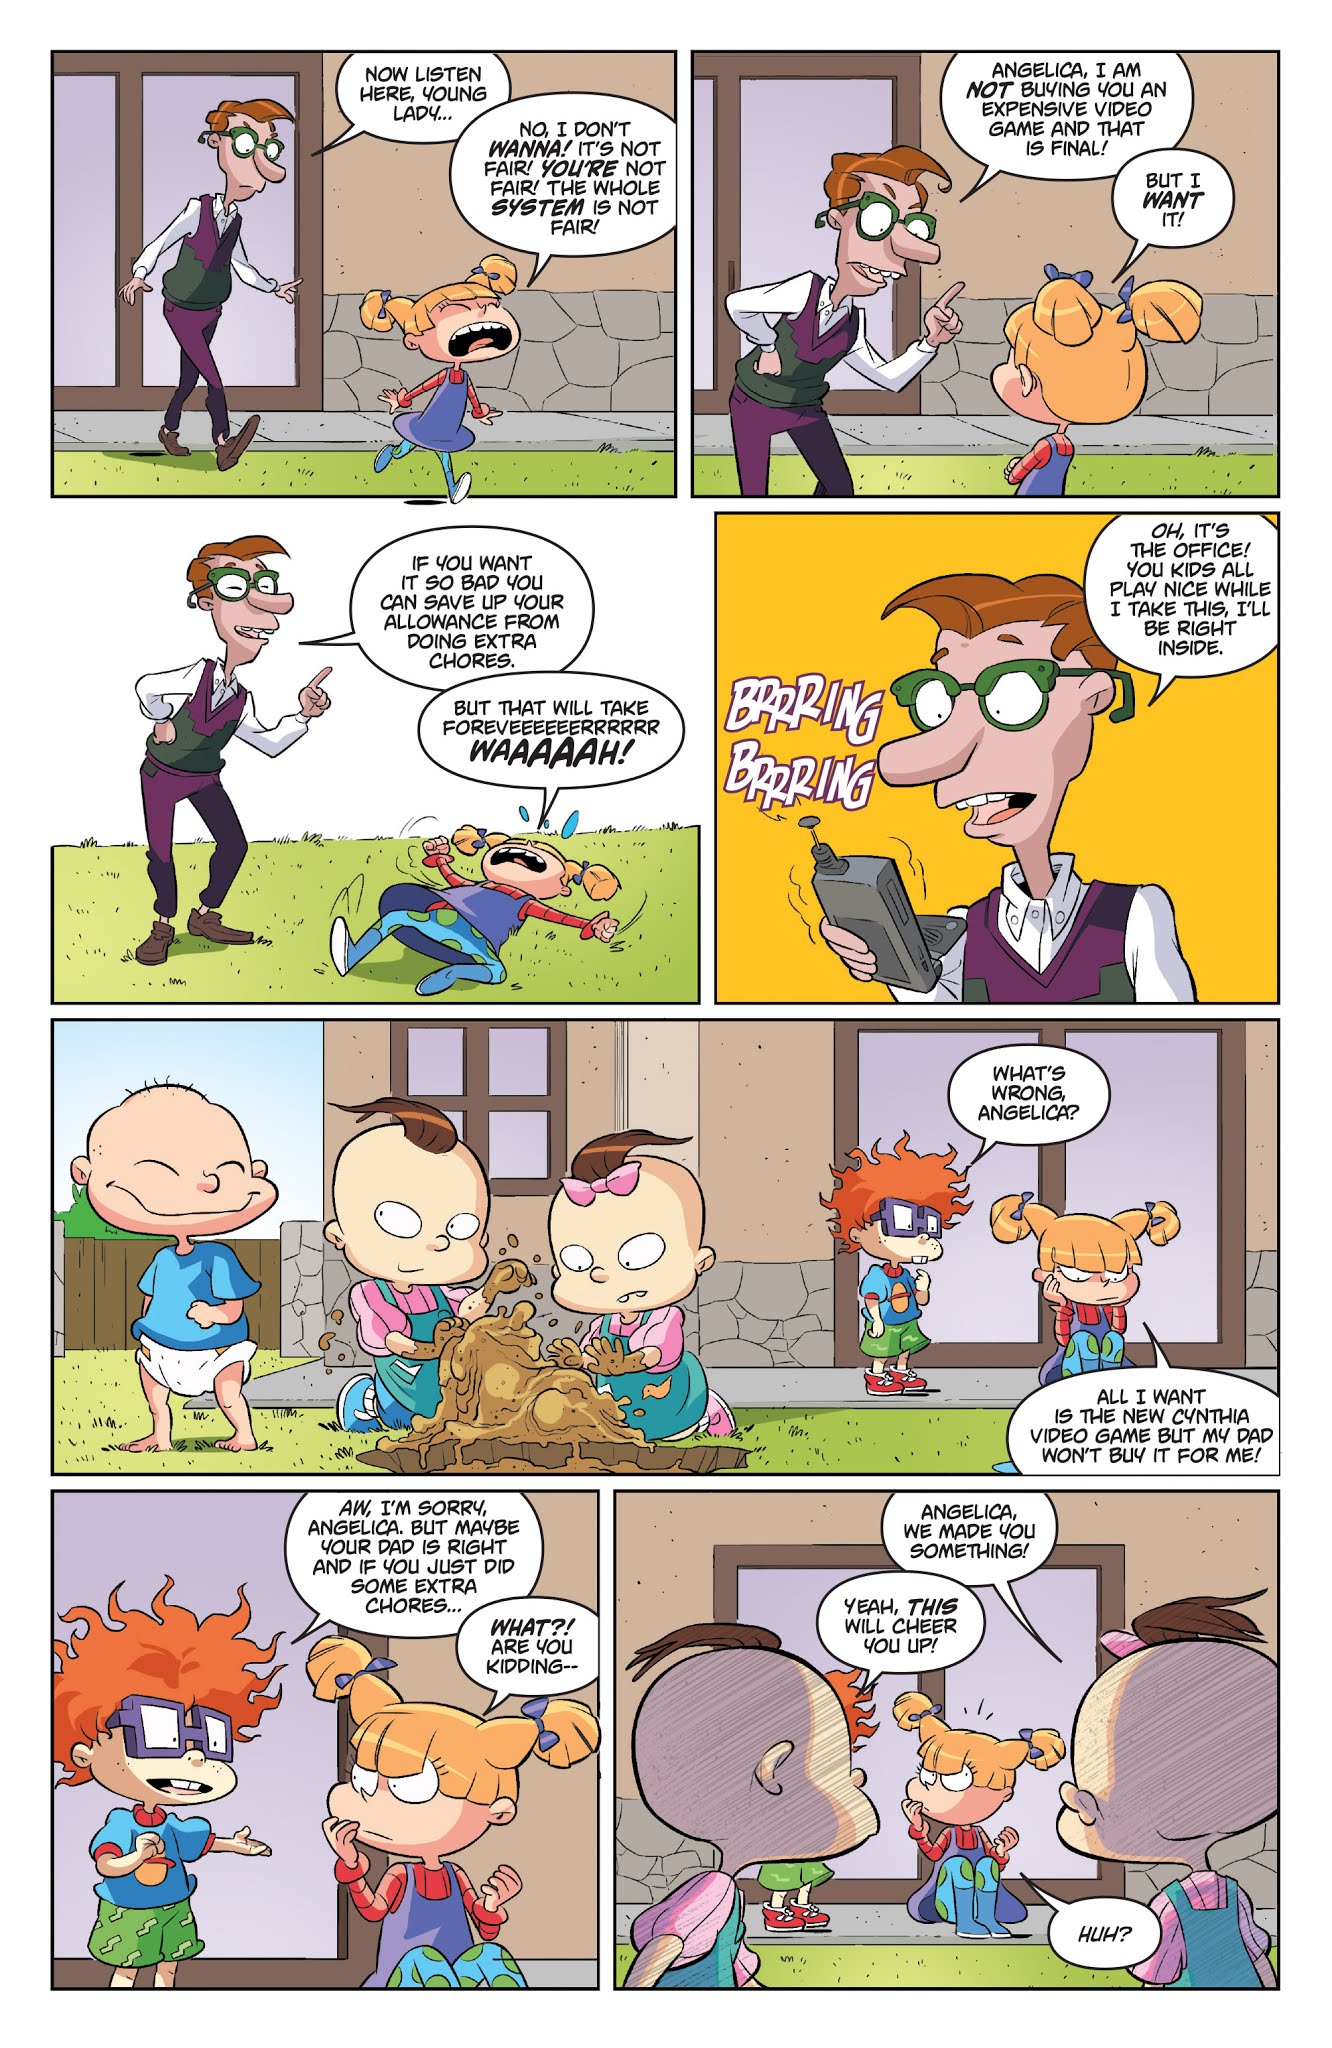 Rugrats Angelica Porn - Rugrats Issue 8 | Read Rugrats Issue 8 comic online in high quality. Read  Full Comic online for free - Read comics online in high quality .| READ  COMIC ONLINE